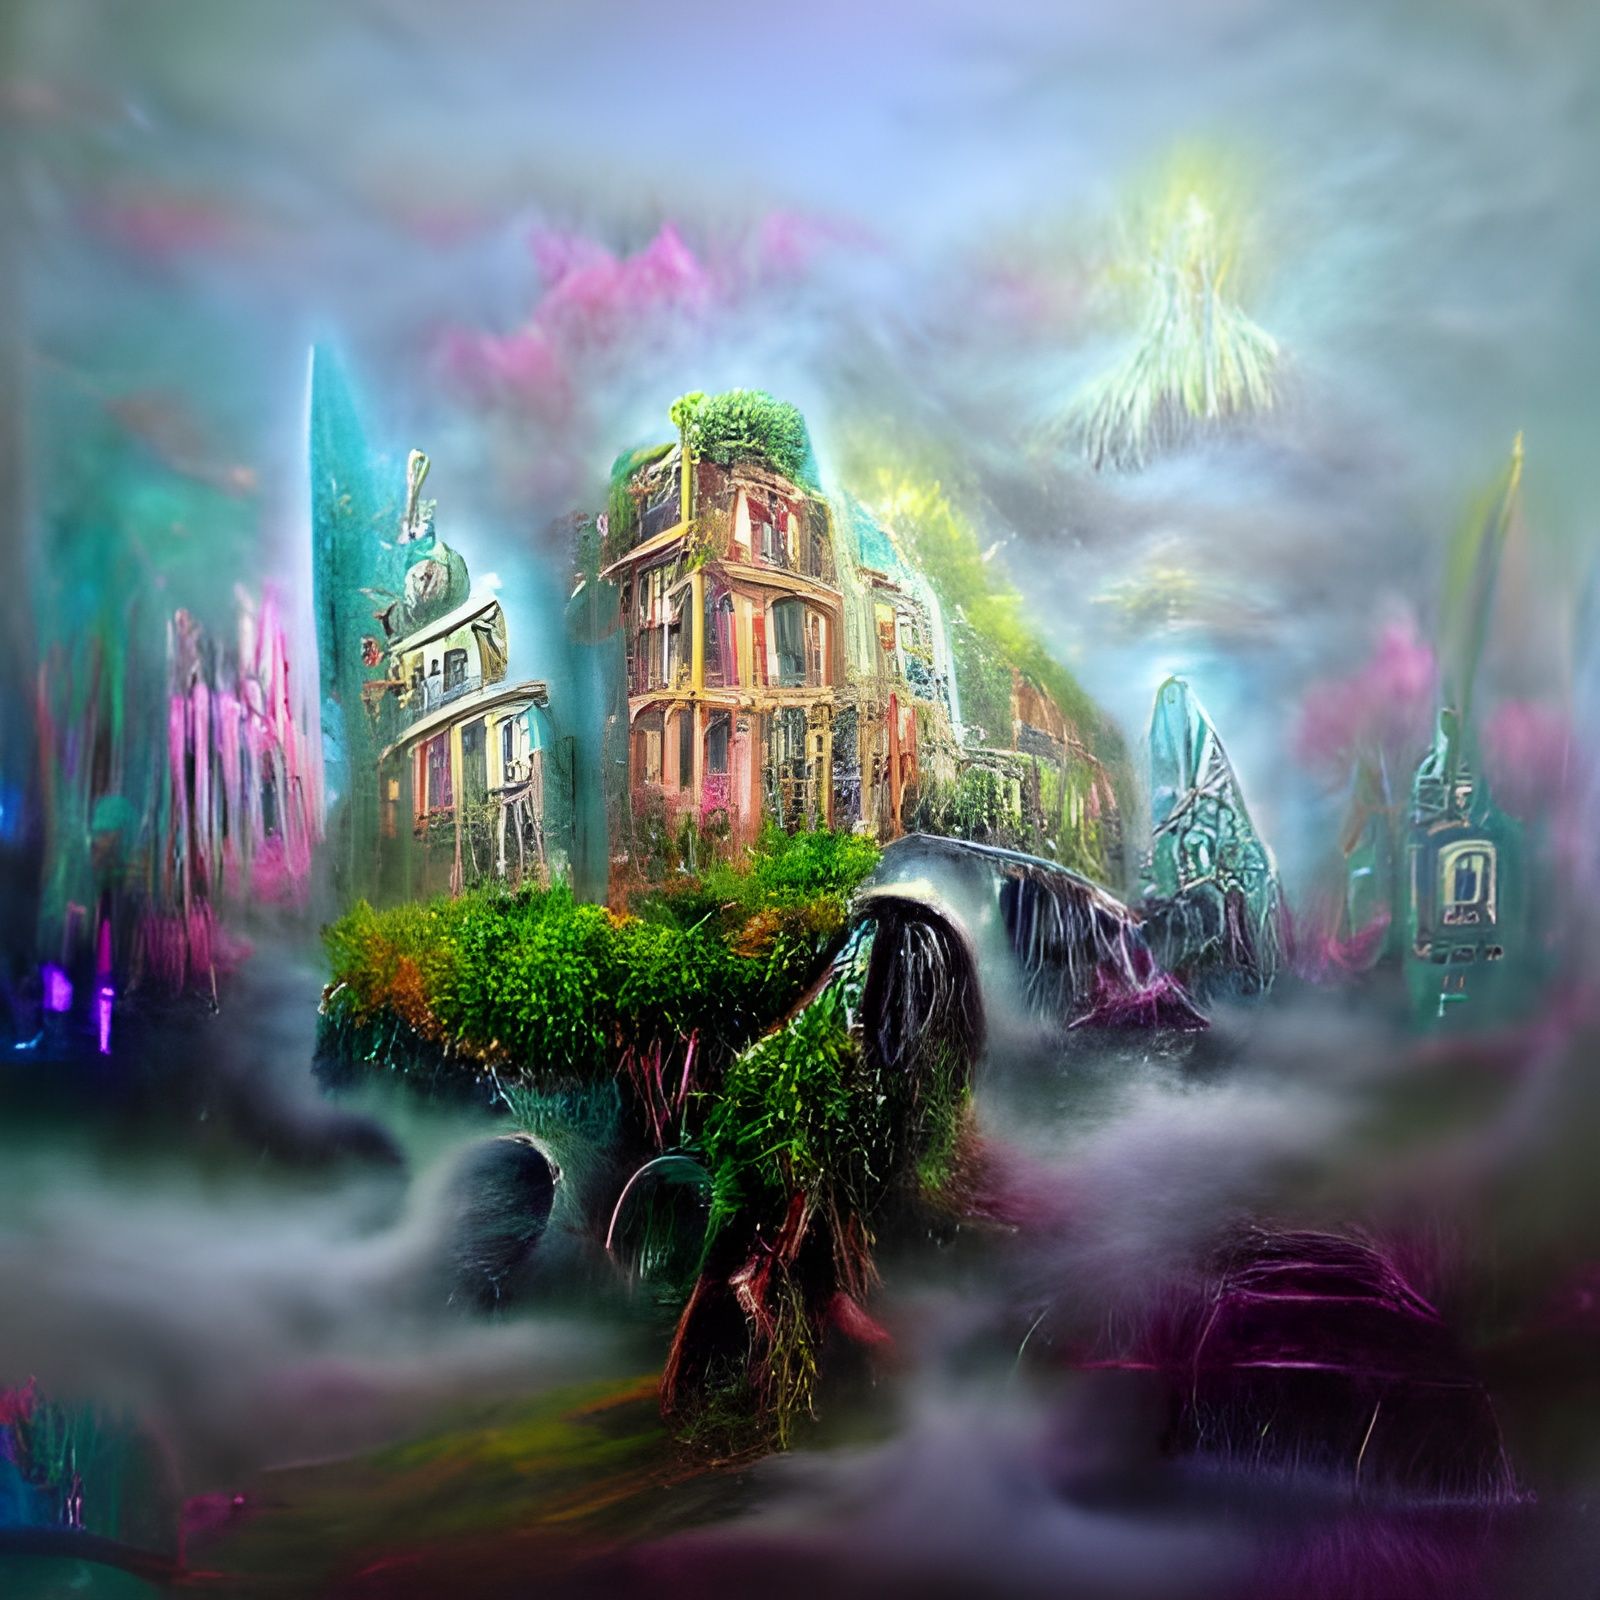 1880s misty London street 8k resolution holographic astral cosmic ...